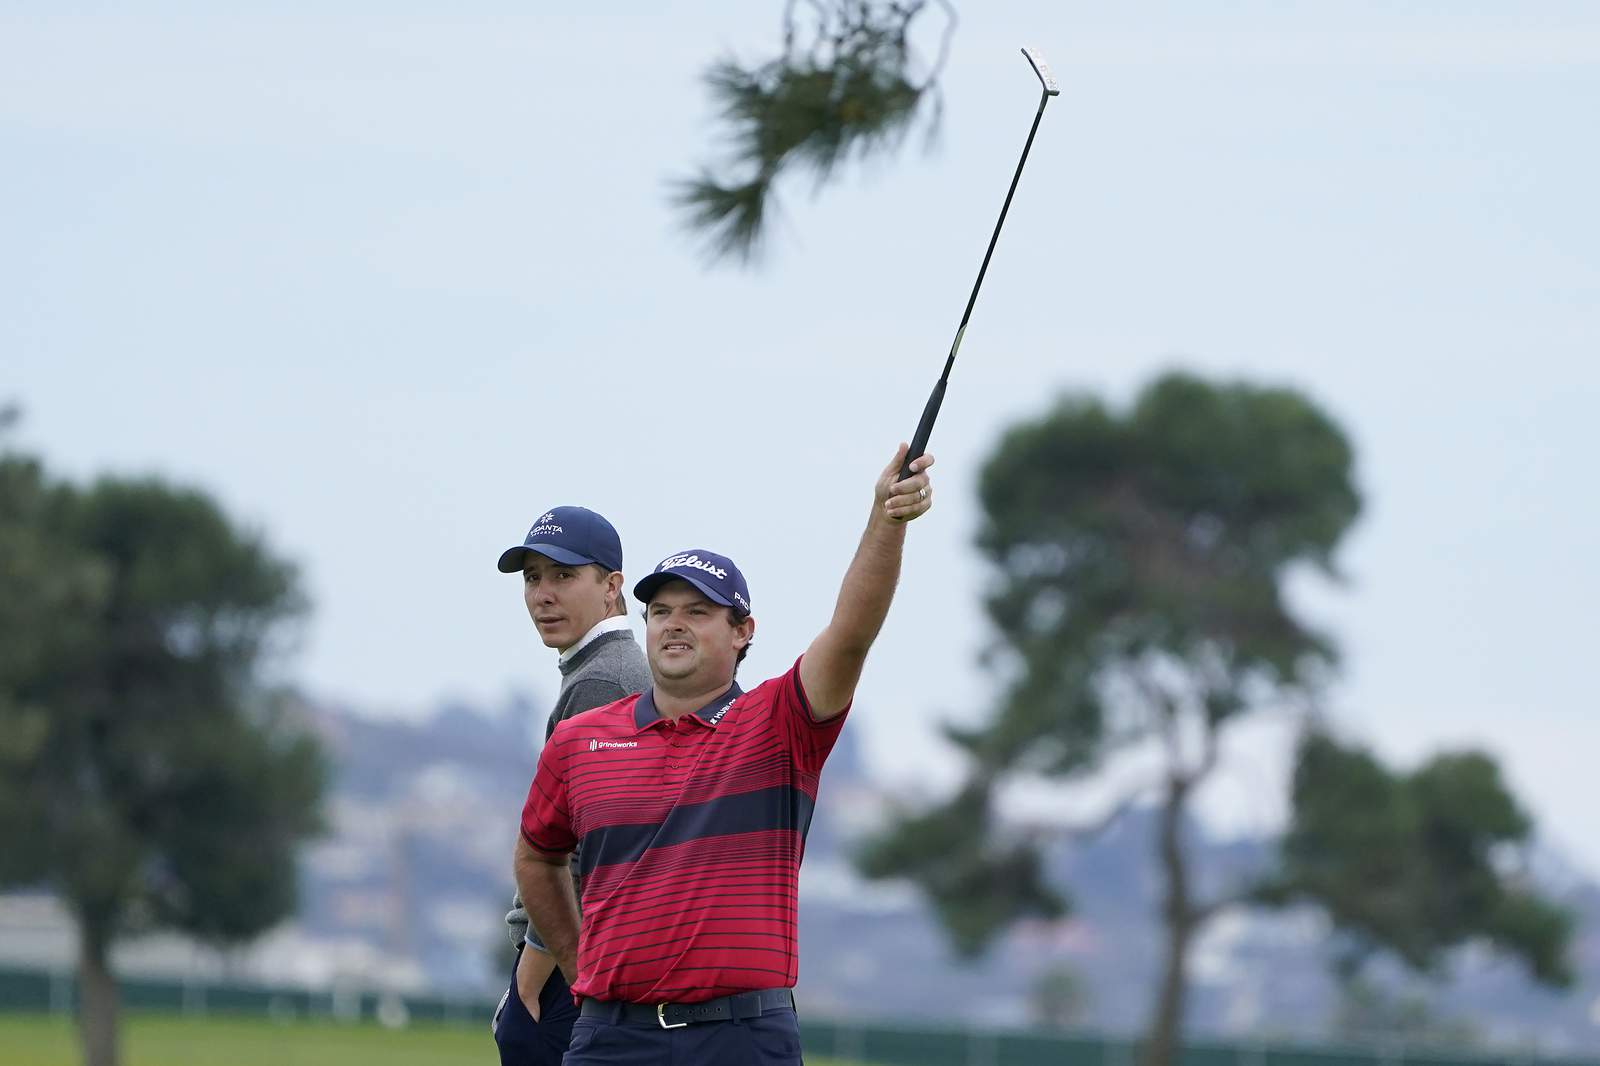 Day after rules controversy, Reed wins at Torrey Pines